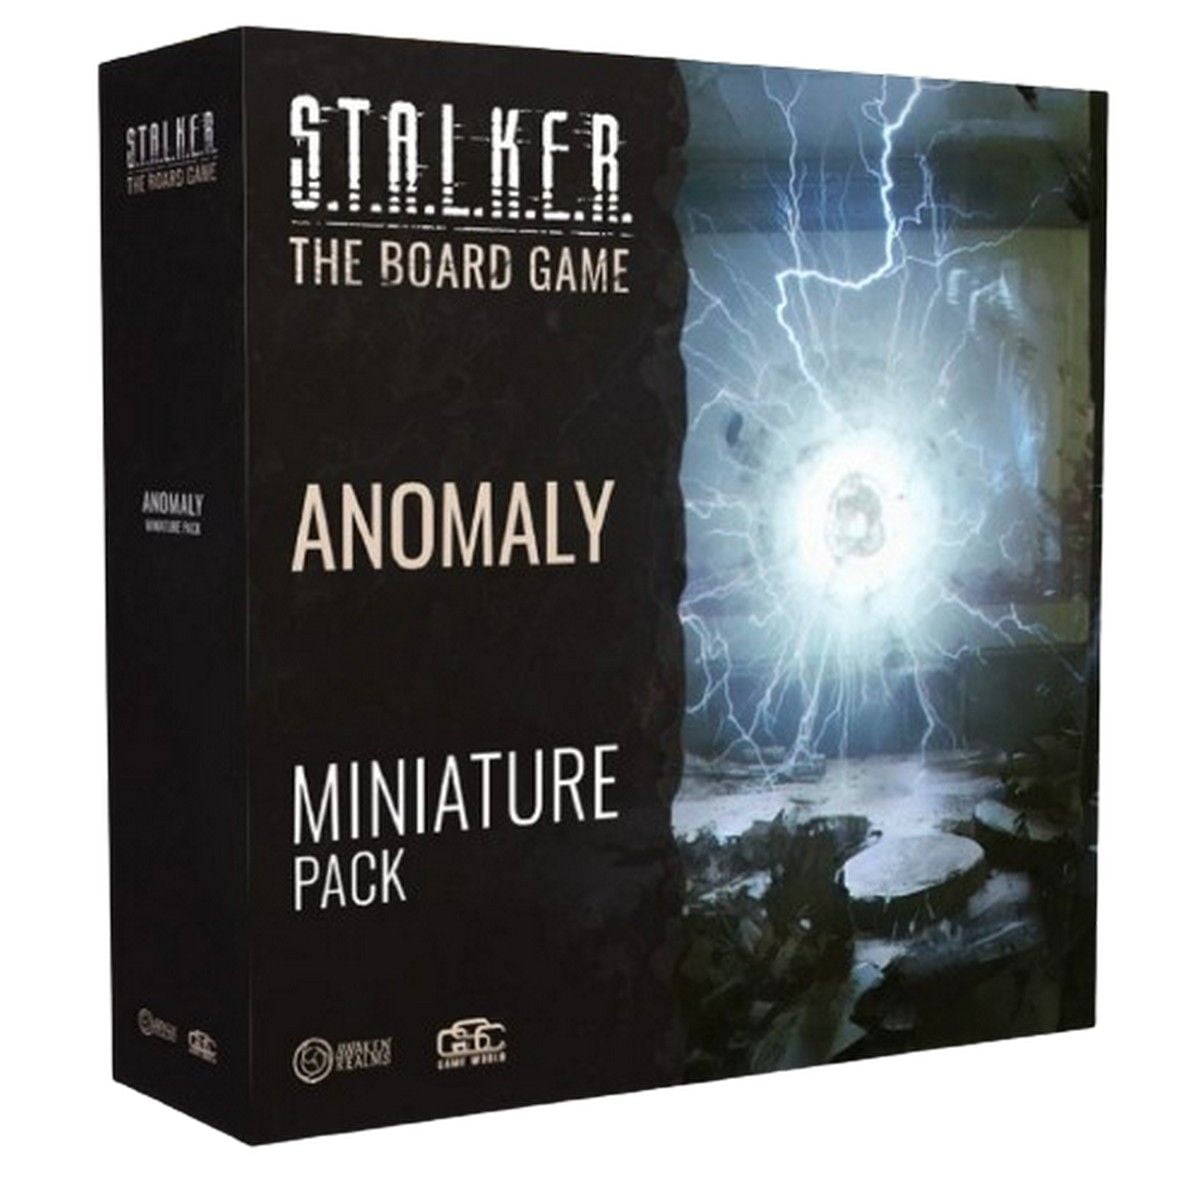 STALKER: The Board Game - Anomalies Pack